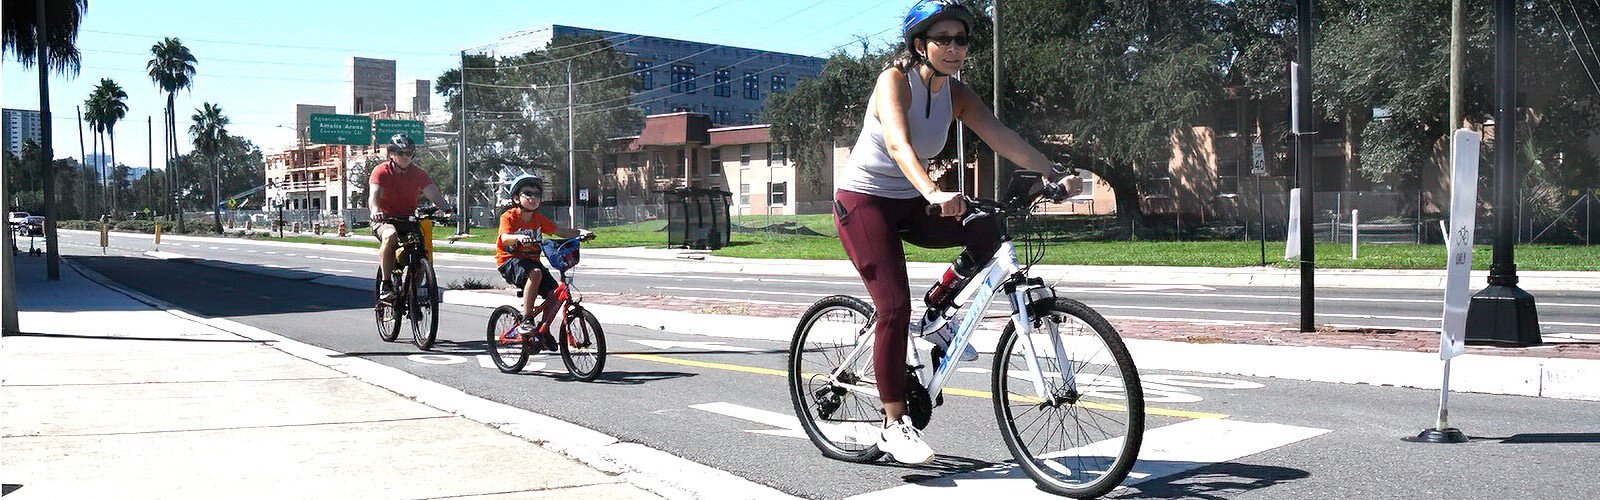 World Car-Free Day is a good way to experience Tampa on a family bicycle ride.